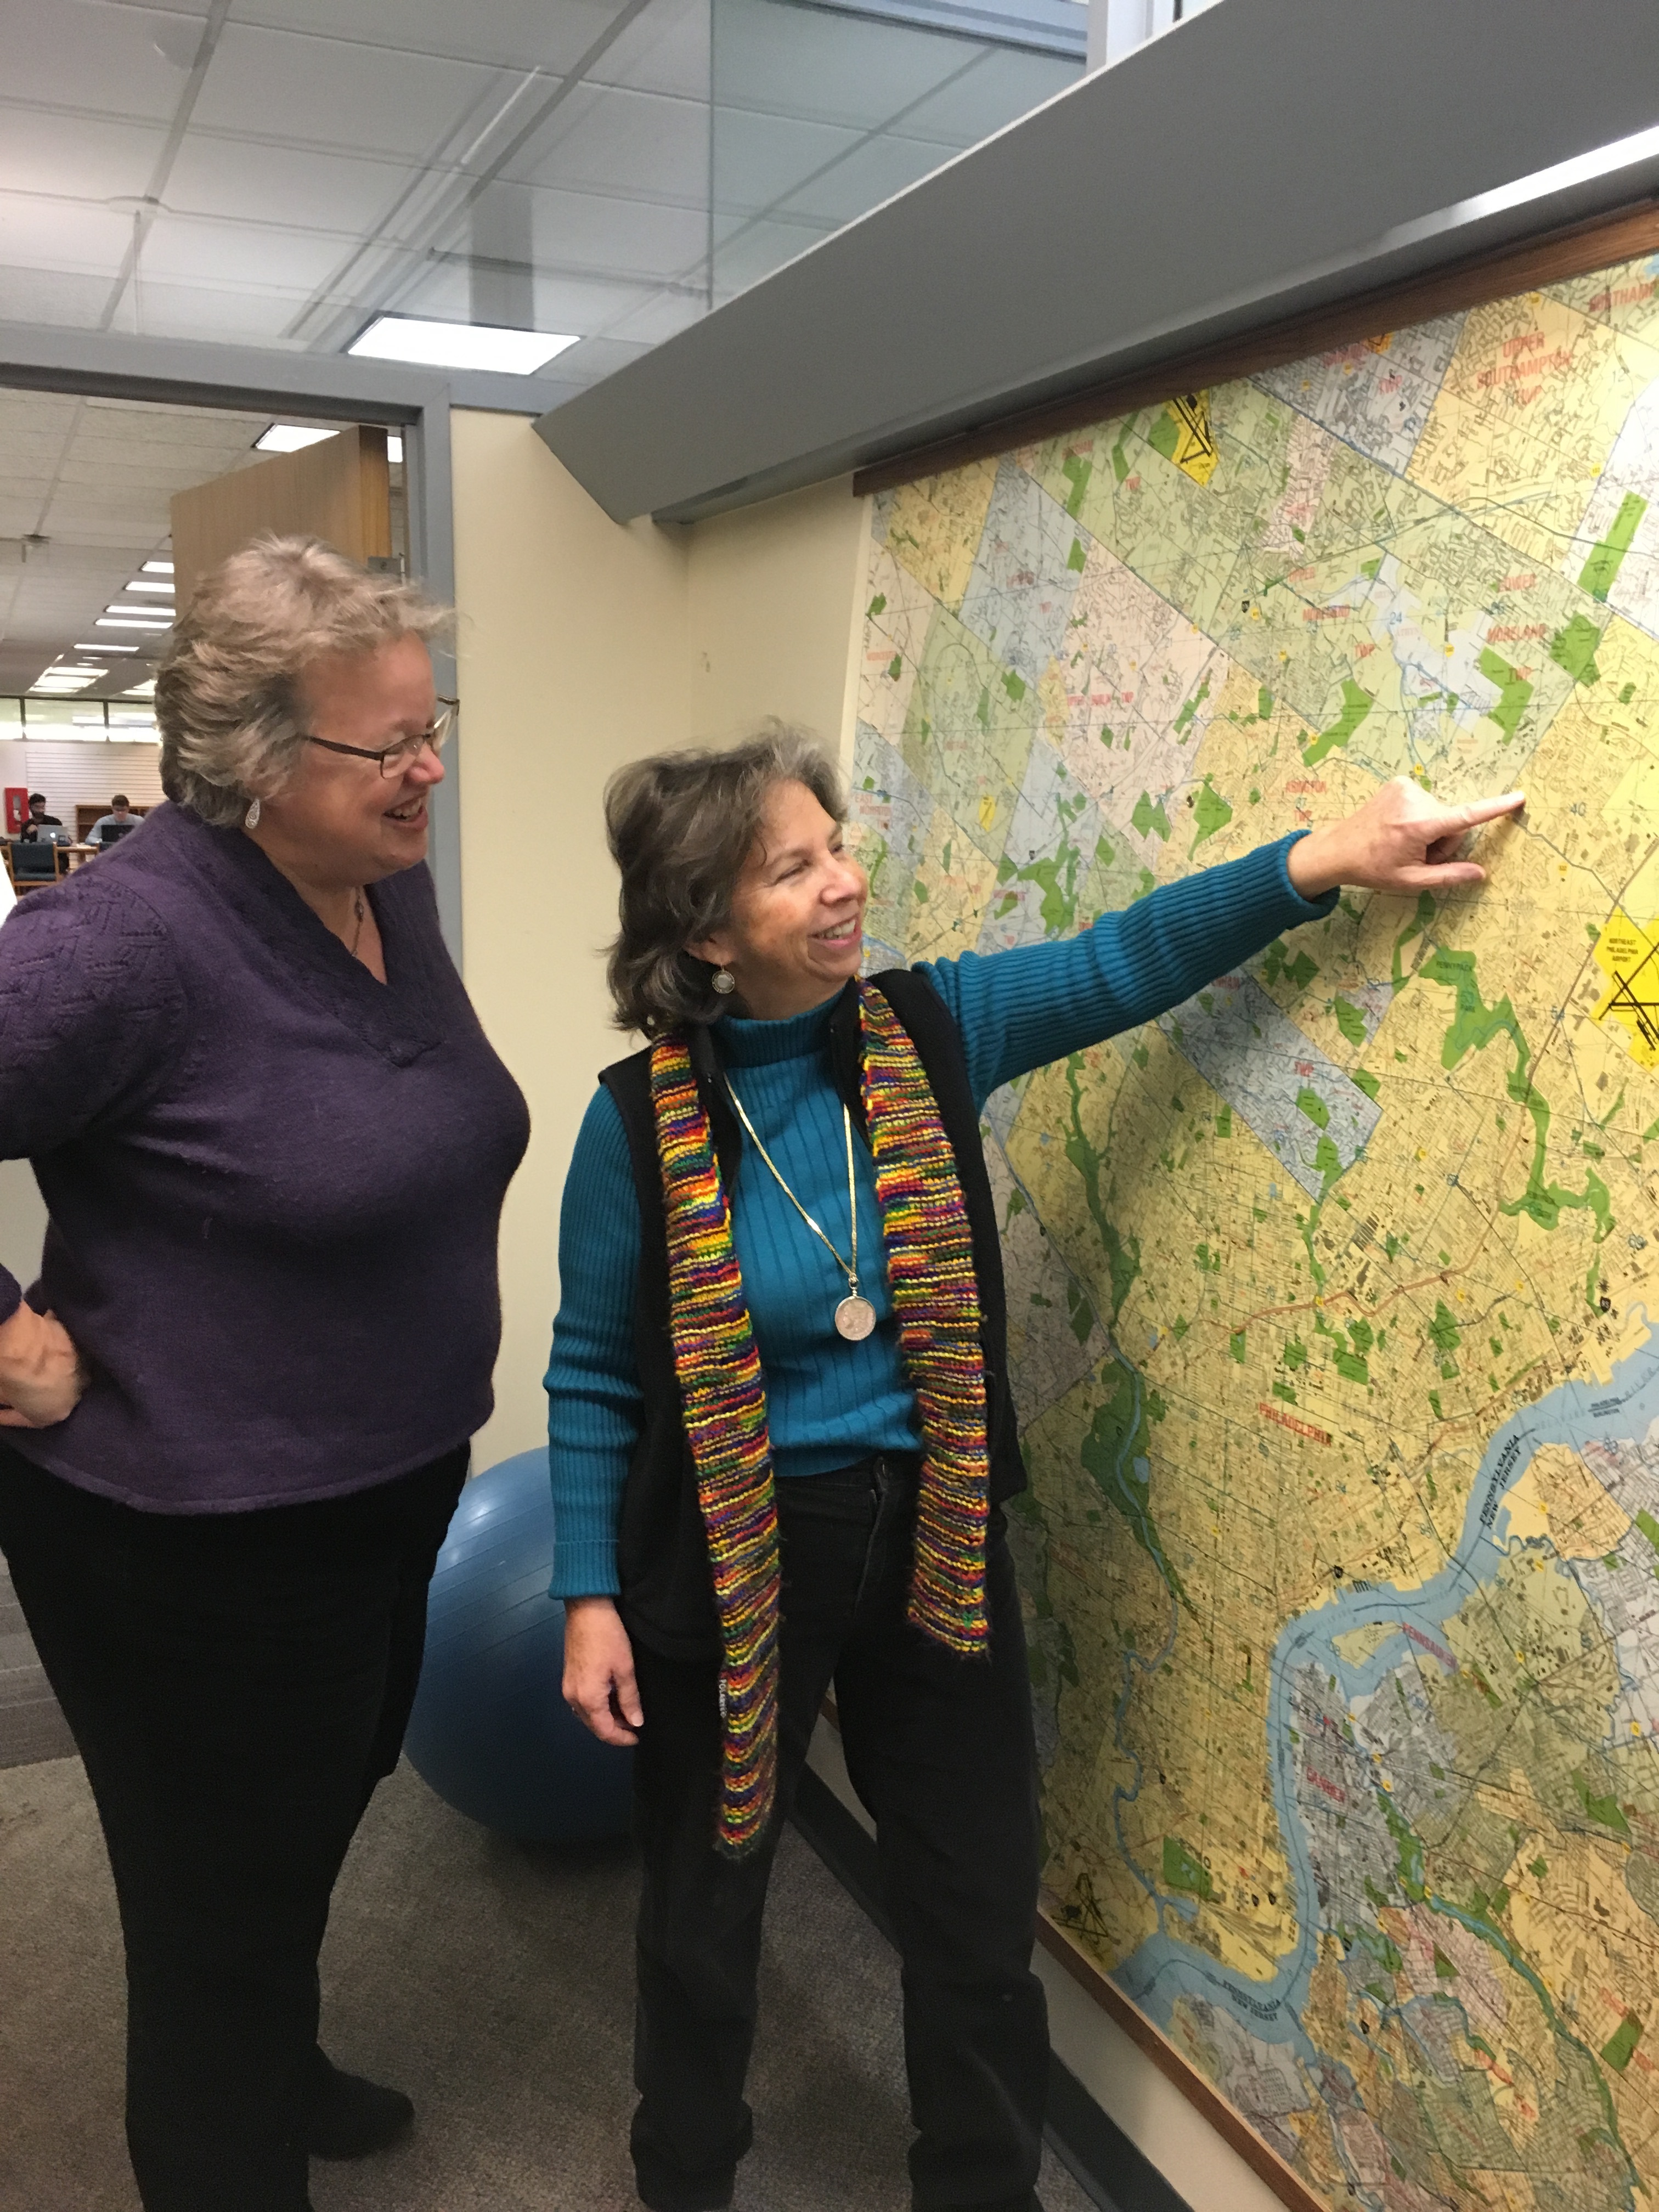 Two women examine a map of Philadelphia that is mounted to the wall in an office.